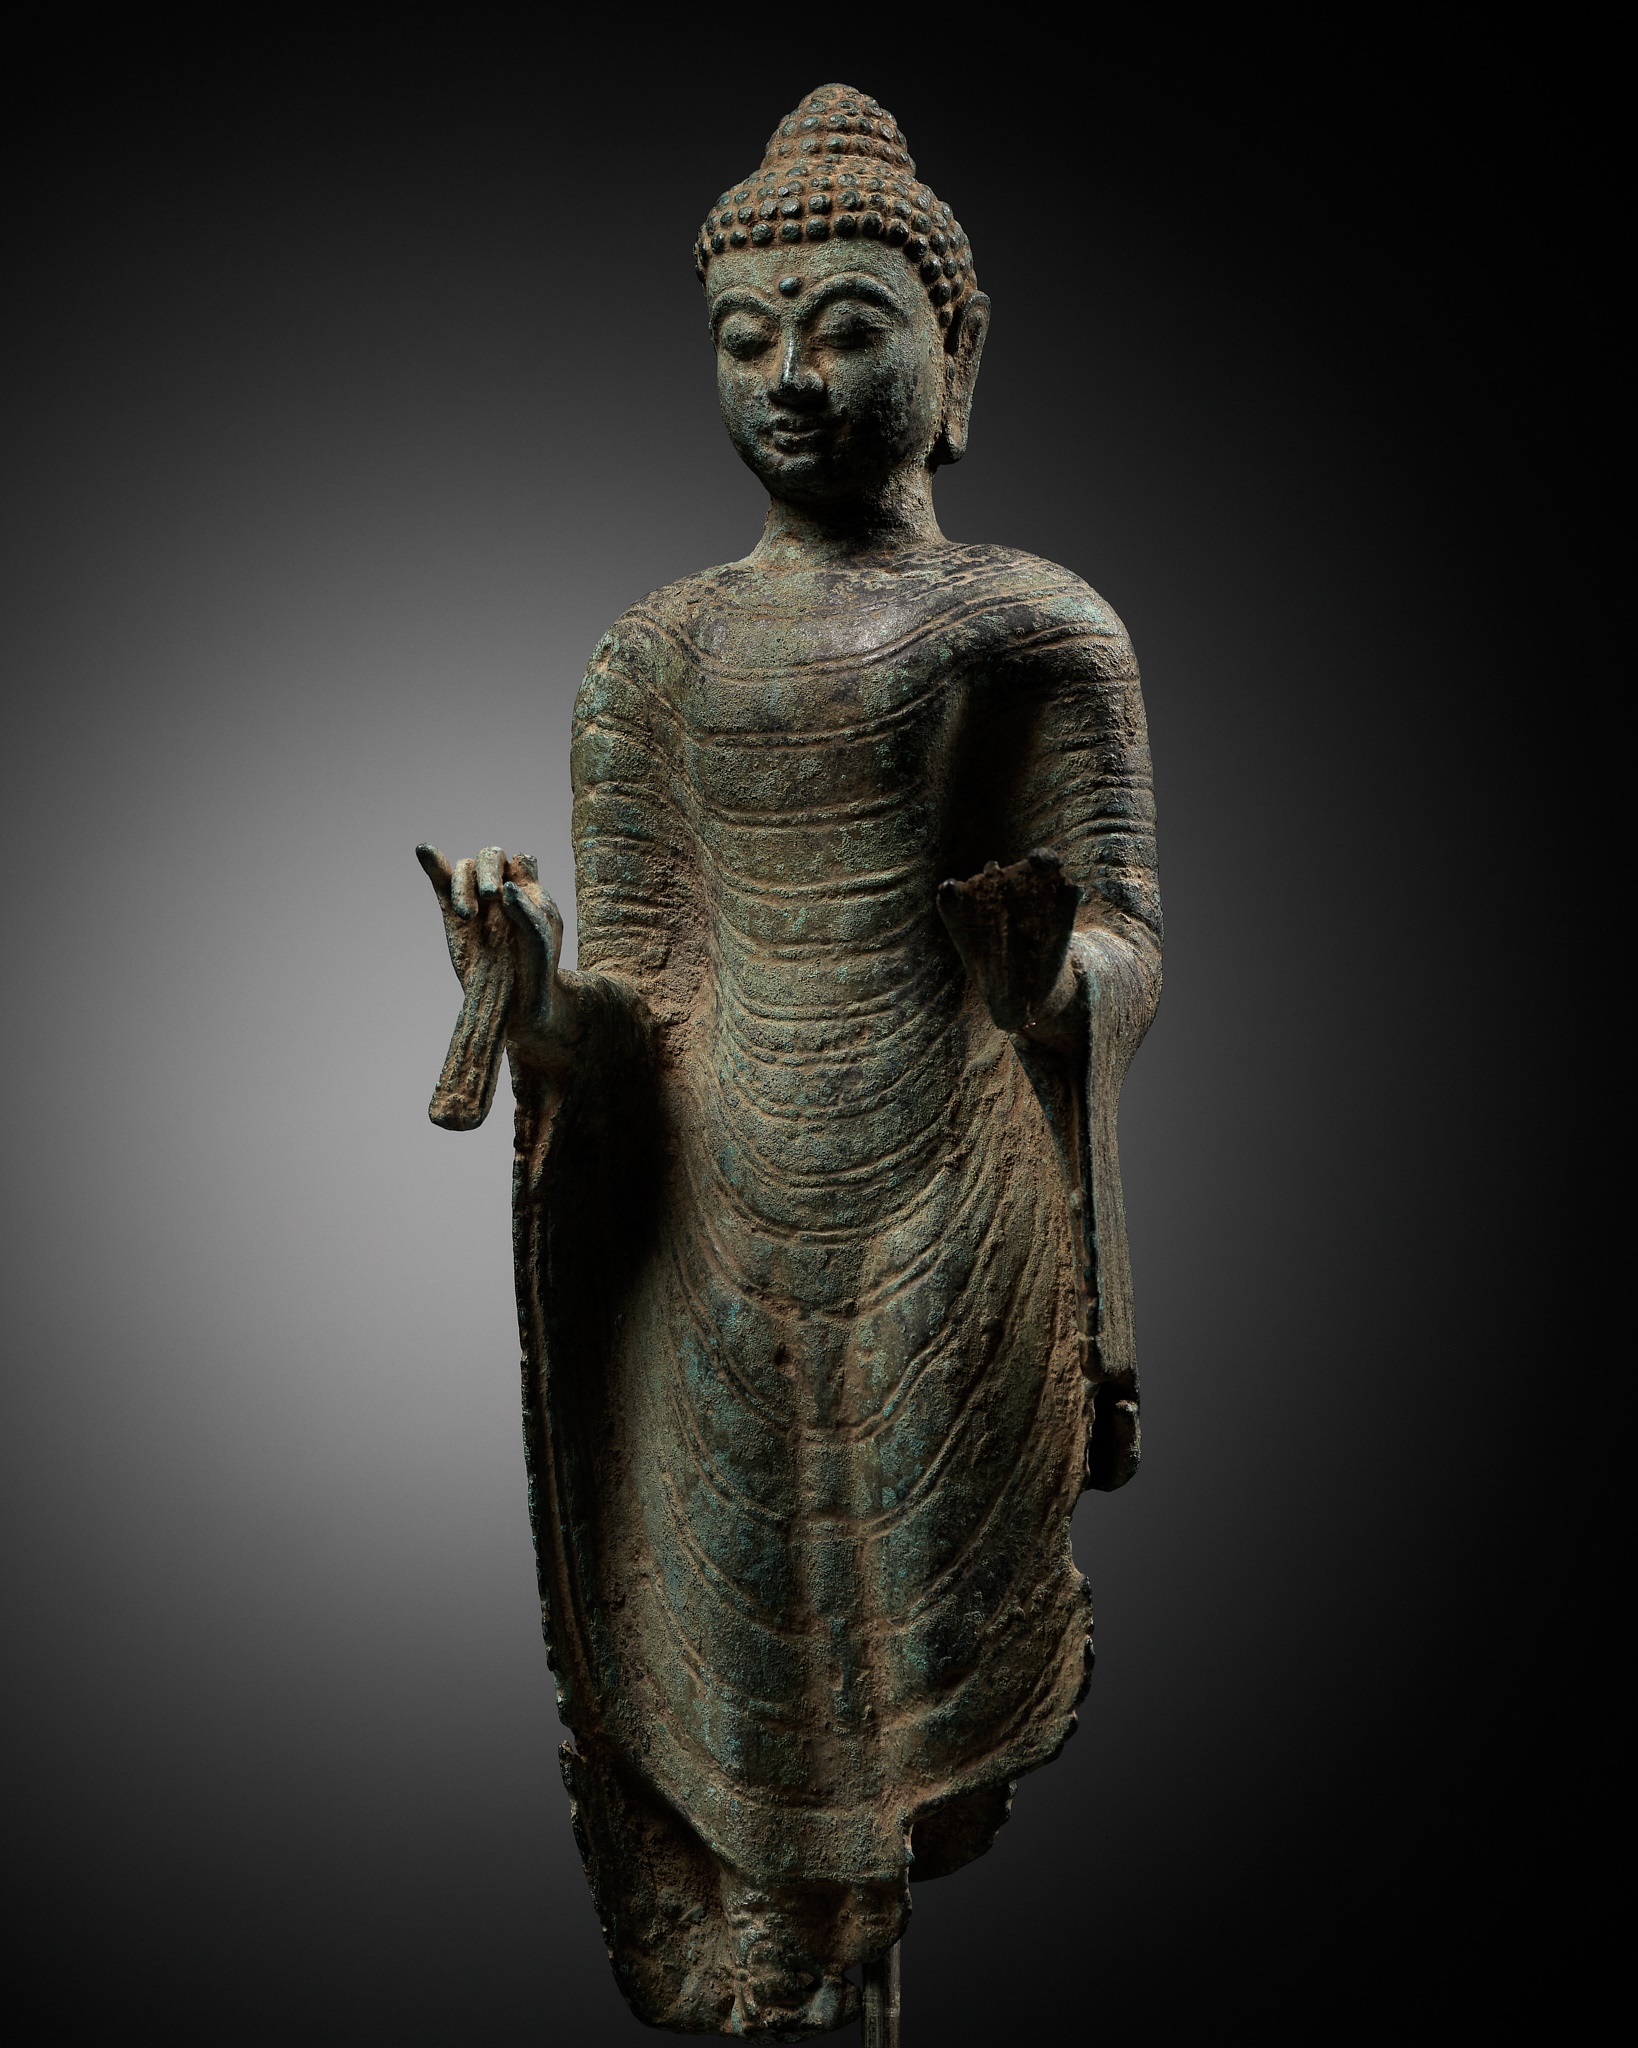 A FRAGMENTARY BRONZE BUST OF BUDDHA, INDONESIA, 16TH-17TH CENTURY